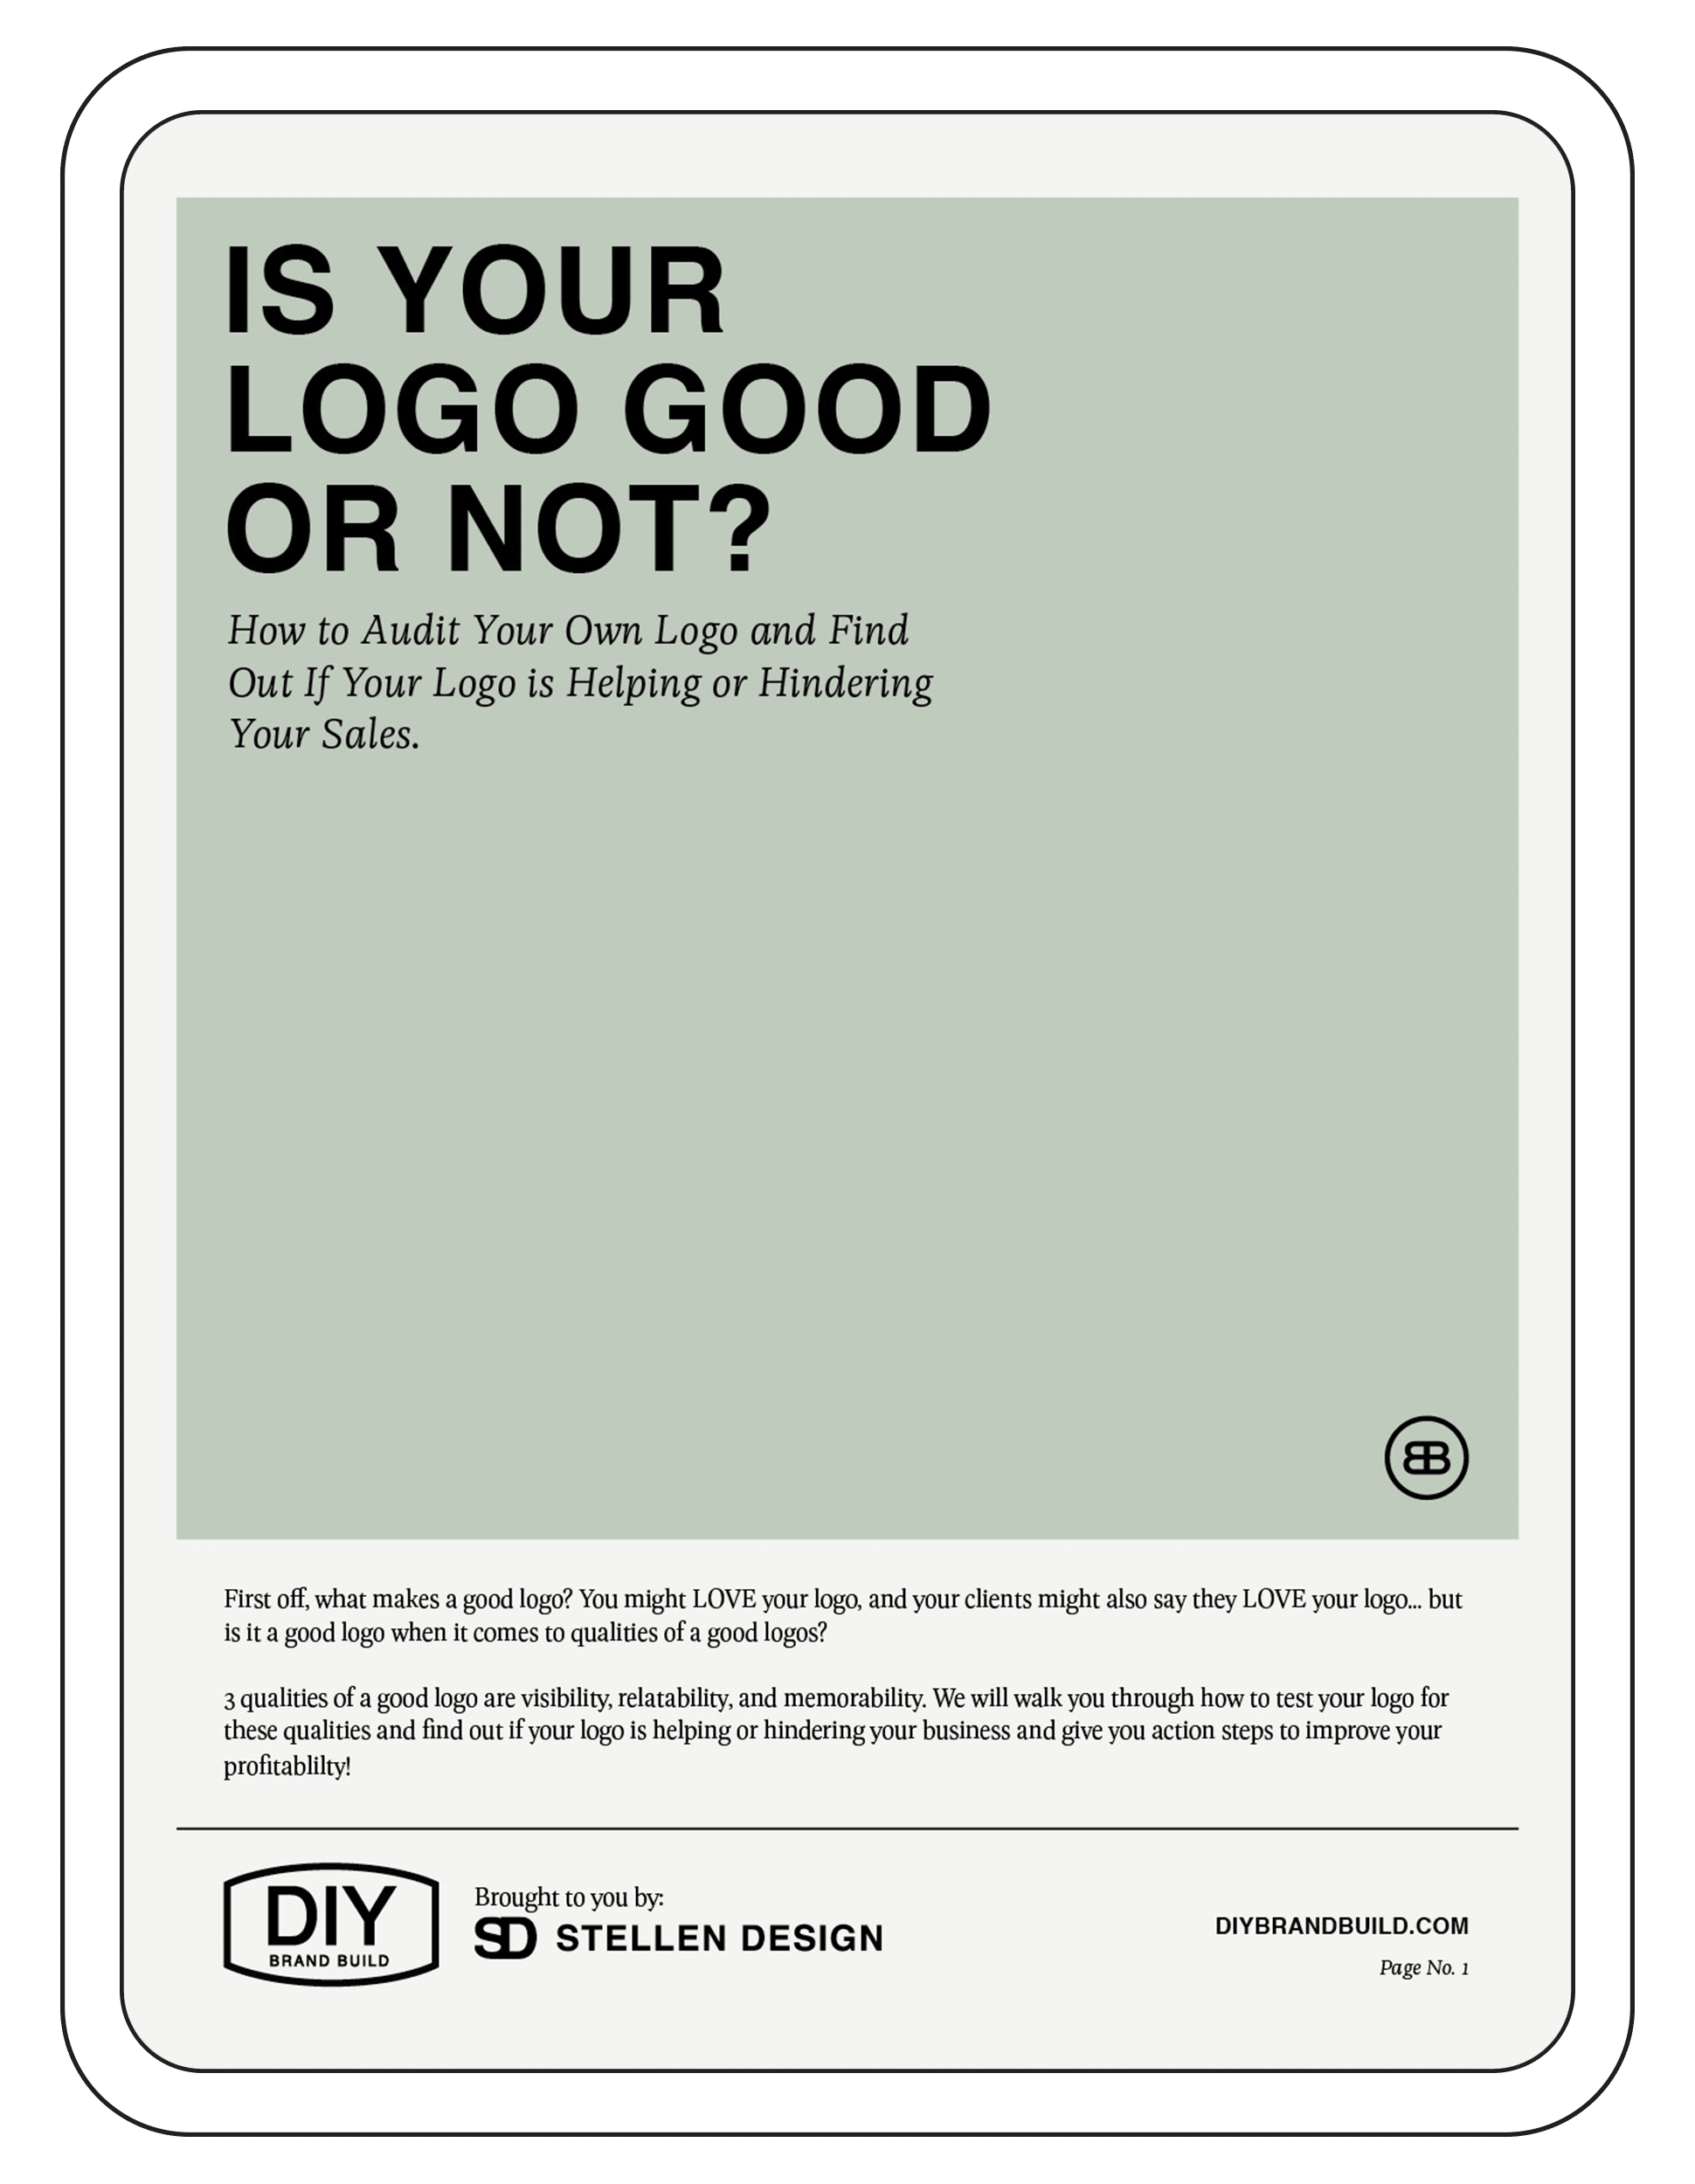 Is your logo good?